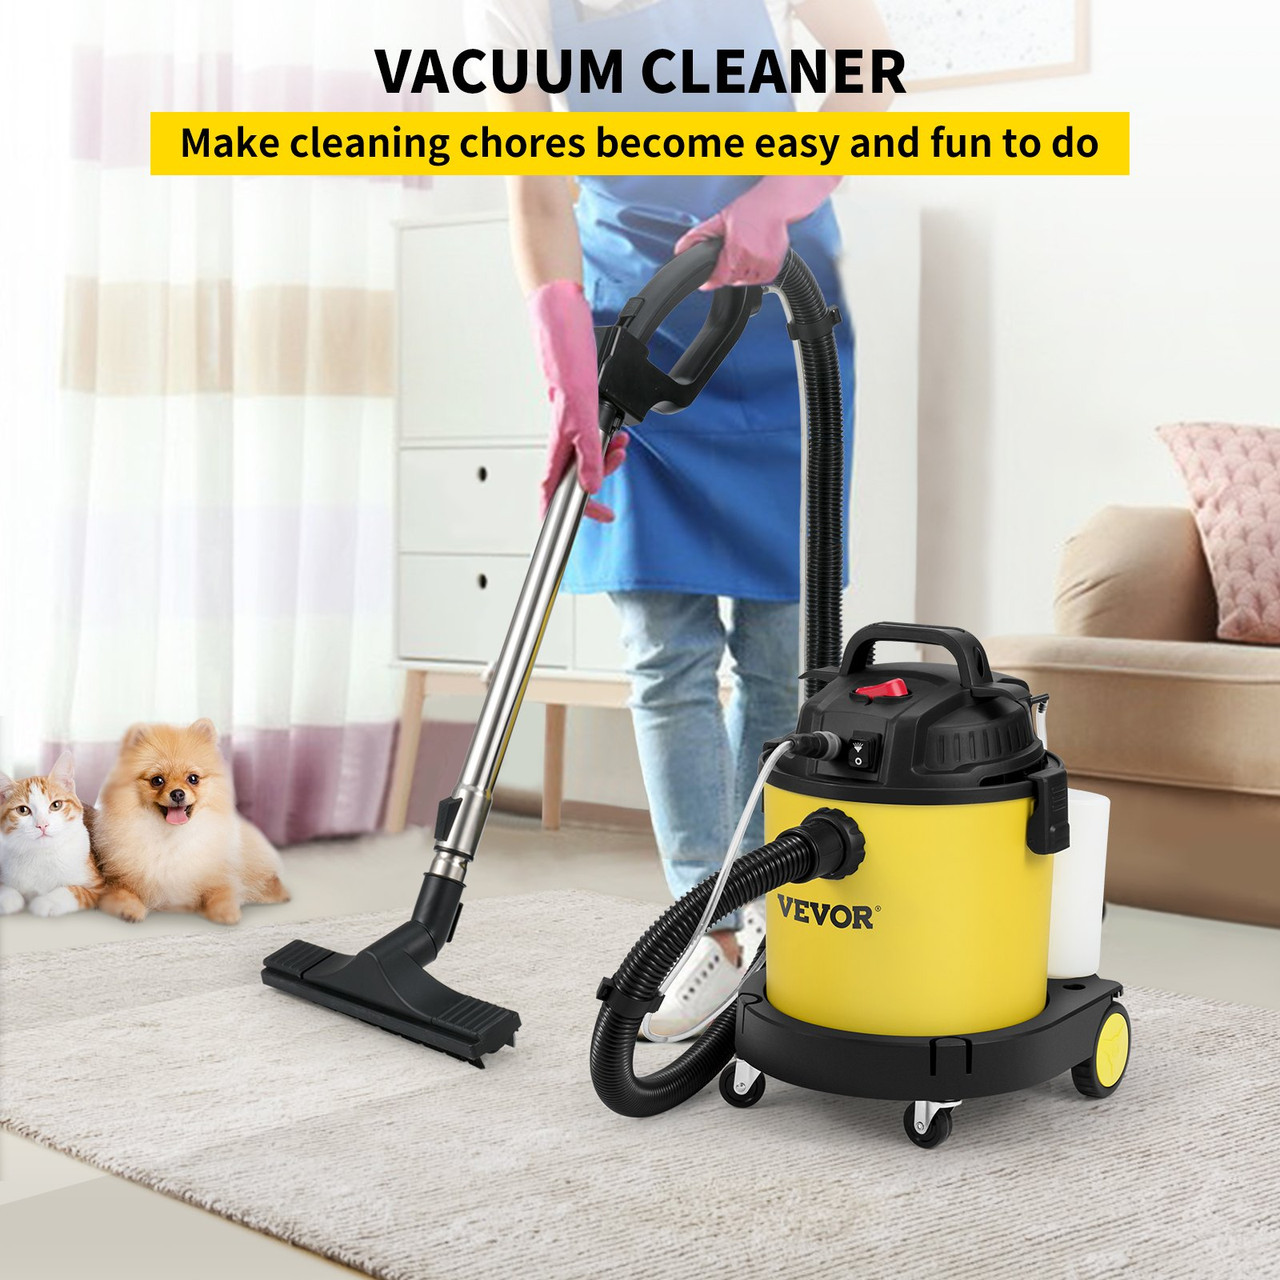 Wet Dry Vac, 5.3 Gallon, 1.6 Peak HP Shop Vacuum, 4-in-1 Wet/Dry Vacuum, Portable Shopvac with Attachment, Blower, Filter Cleaning System